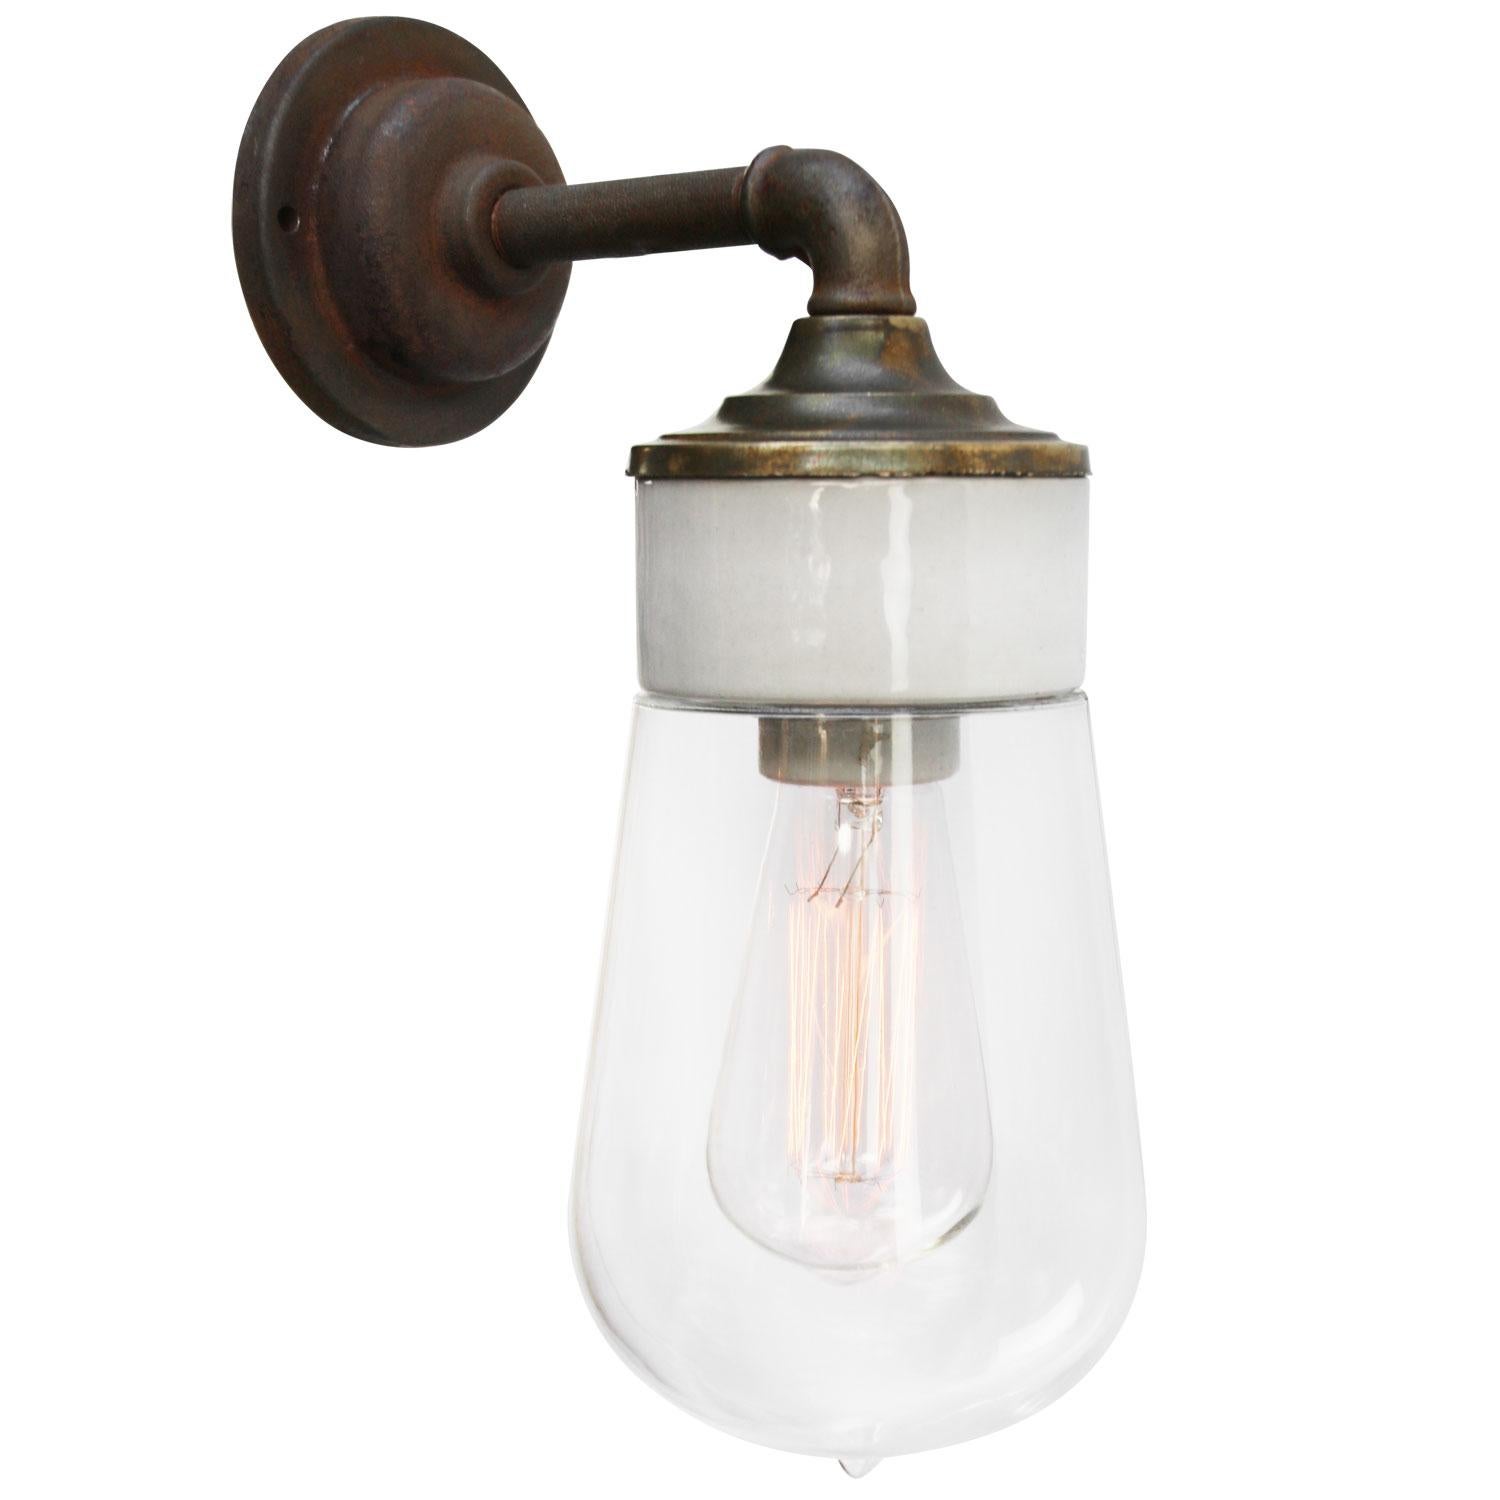 Porcelain Industrial wall lamp.
White porcelain, brass and cast iron
Clear glass.
2 conductors, no ground.

Diameter cast iron wall piece 10.5 cm / 4”.
2 holes to secure.

Weight: 1.95 kg / 4.3 lb

Priced per individual item. All lamps have been